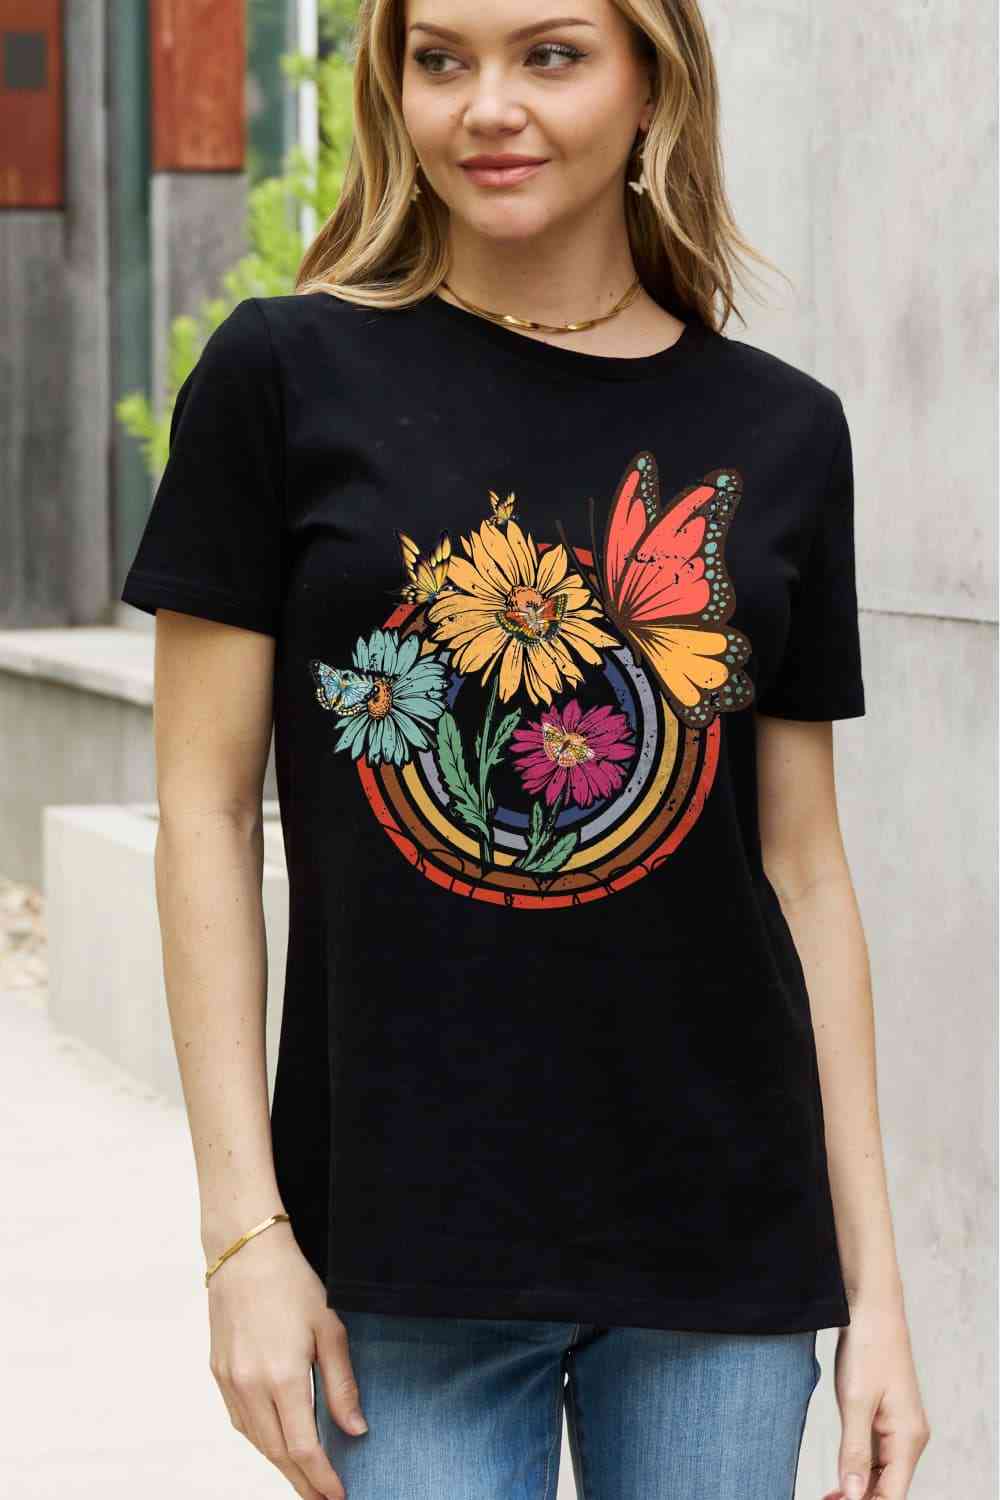 BM TEE A Flower & Butterfly Graphic Cotton Tee